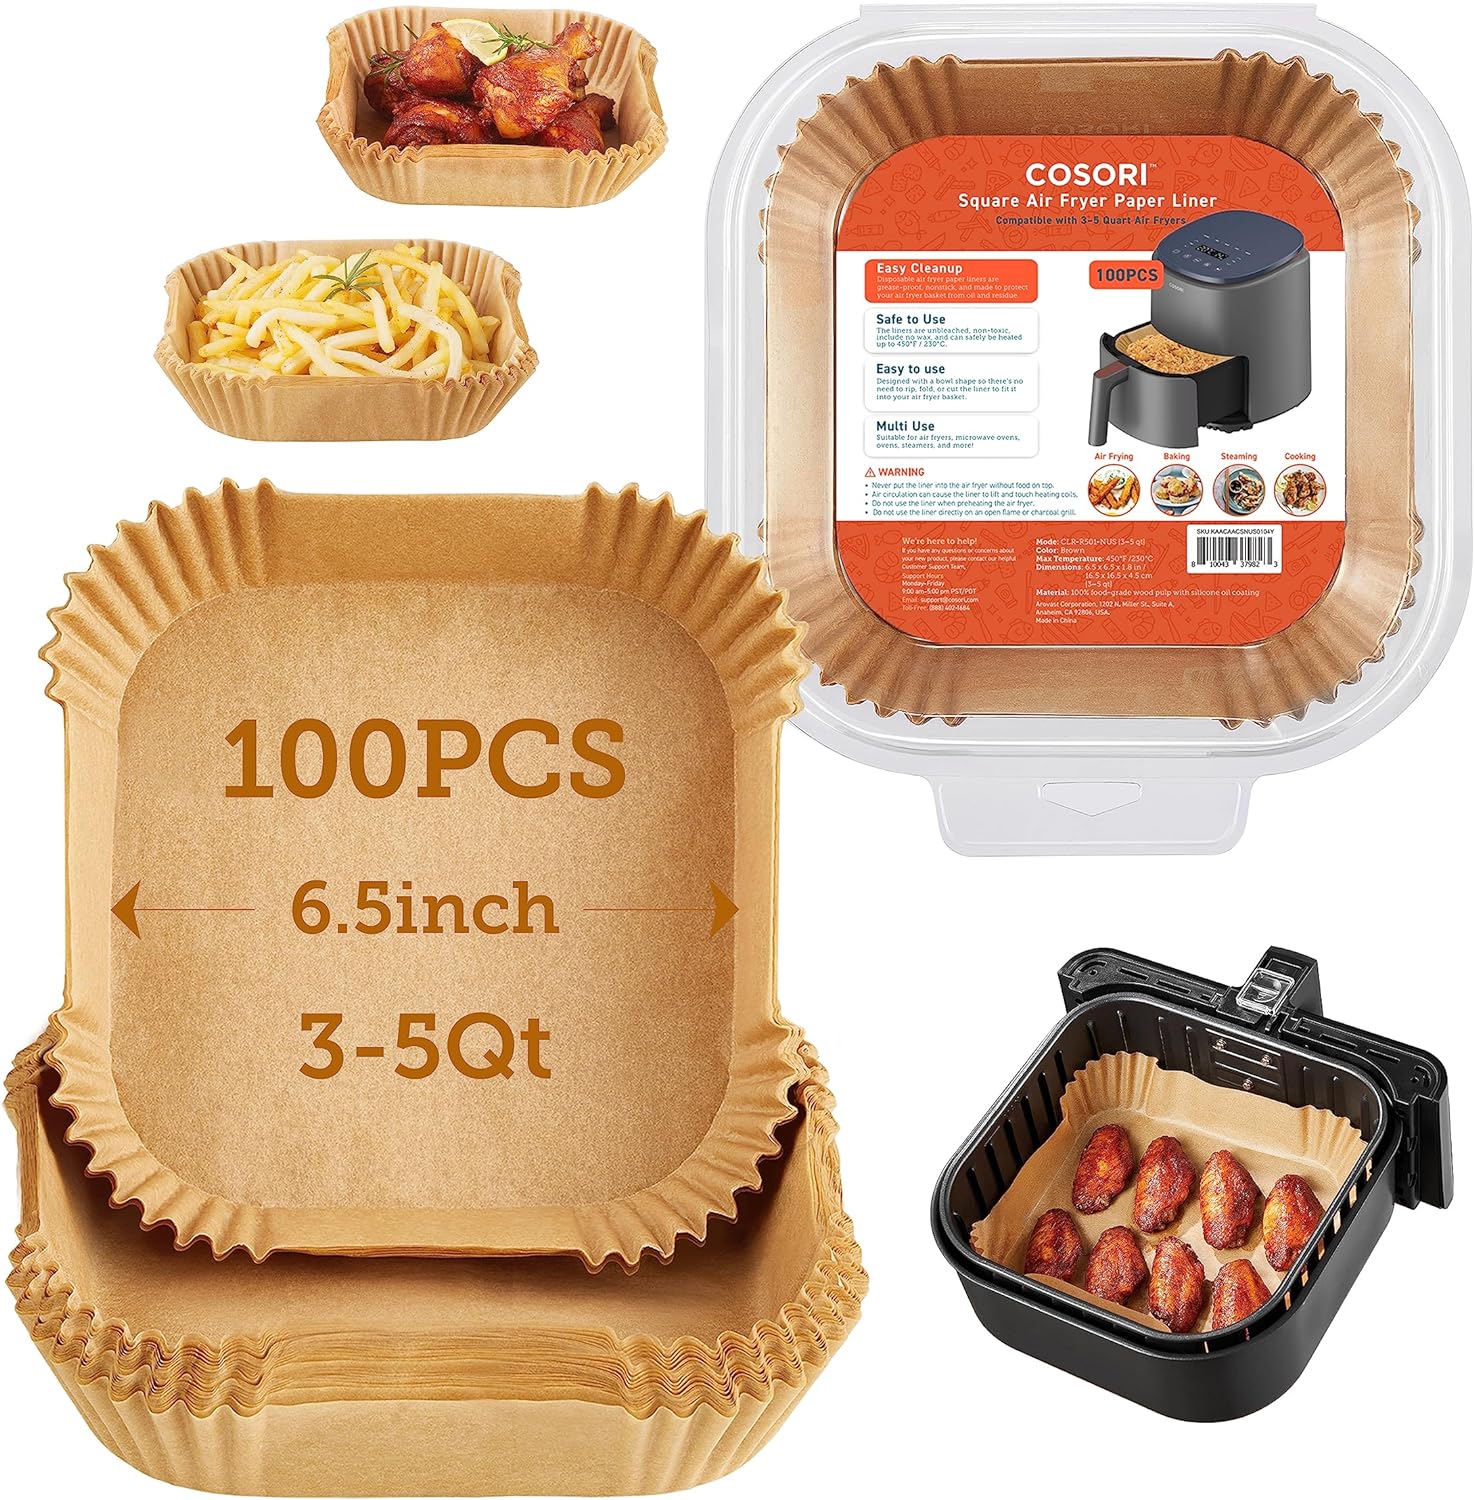 I bought this as a gift for my son's air fryer, he said these are a breeze. He loves them so much, he bought more. He cooks in his air fryer every day, and he said having these makes it so easy to clean up. If you have an air fryer, get this set, you will be amazed.